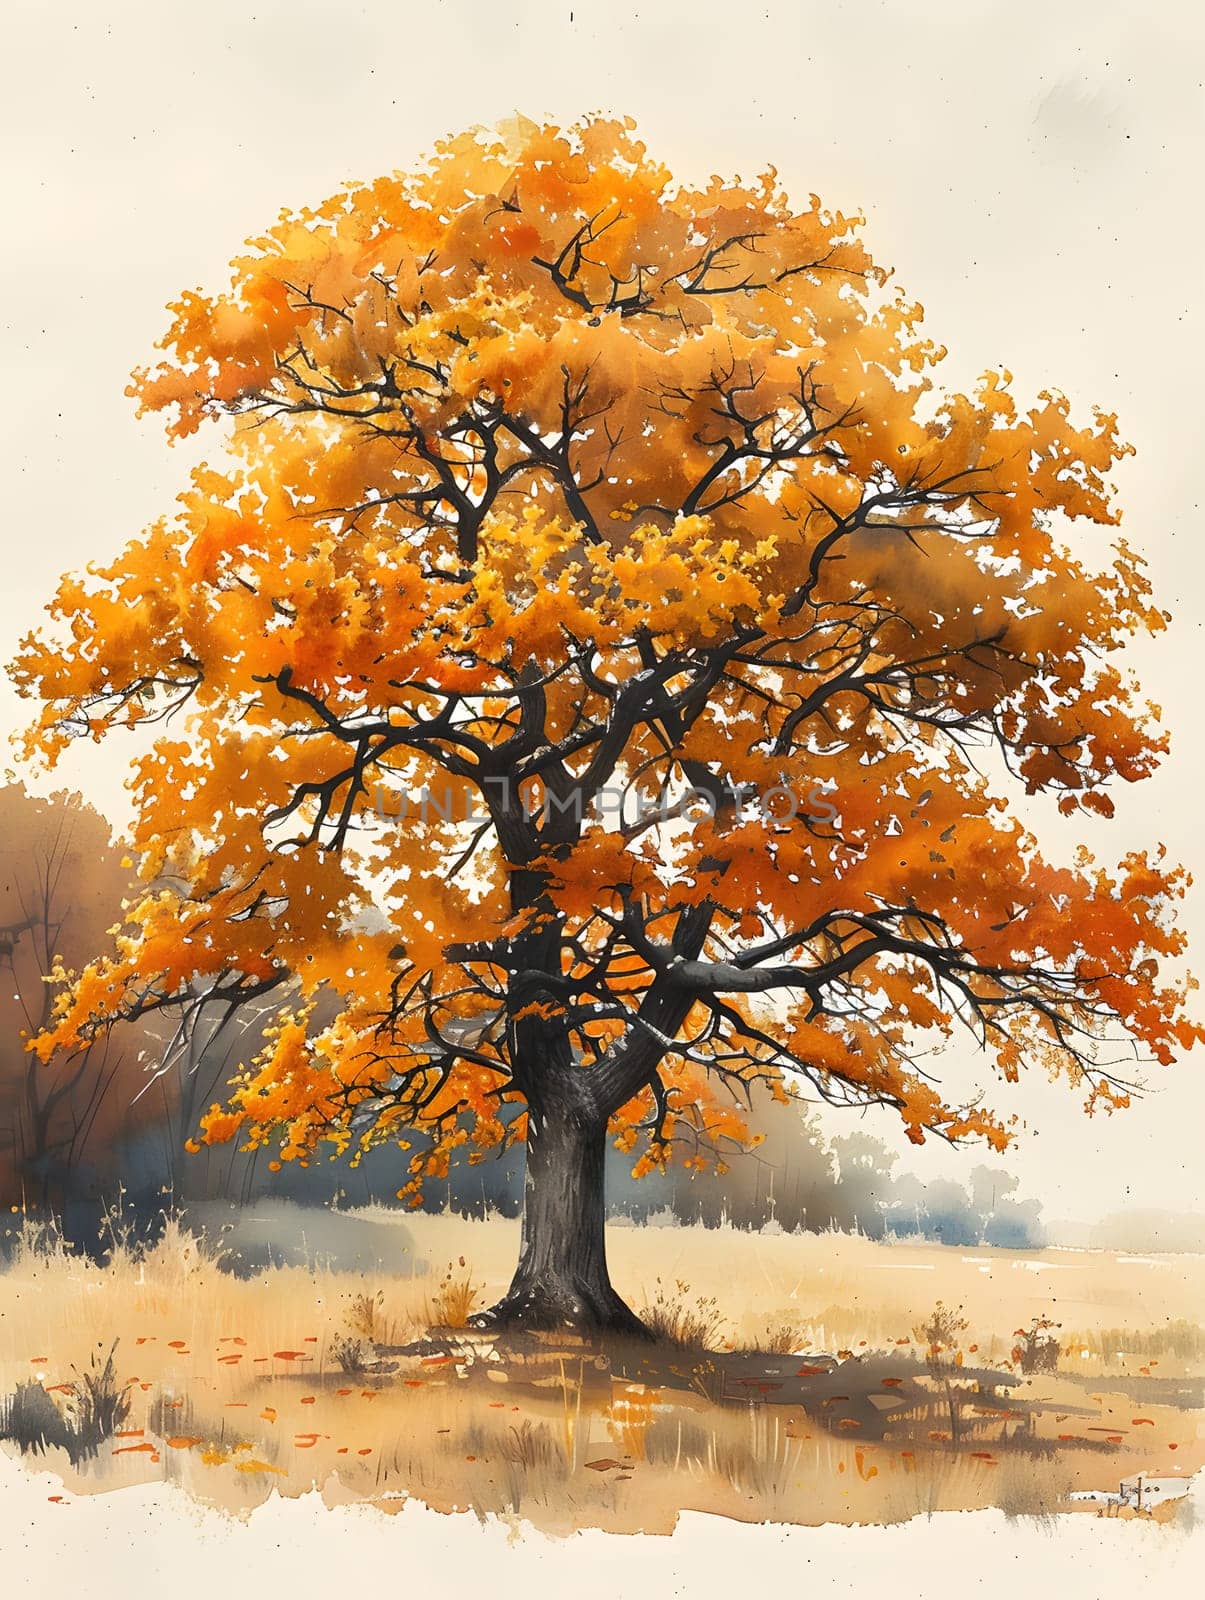 An art piece depicting a natural landscape with a vibrant tree showcasing orange leaves. The painting captures the beauty of a deciduous plant in full color